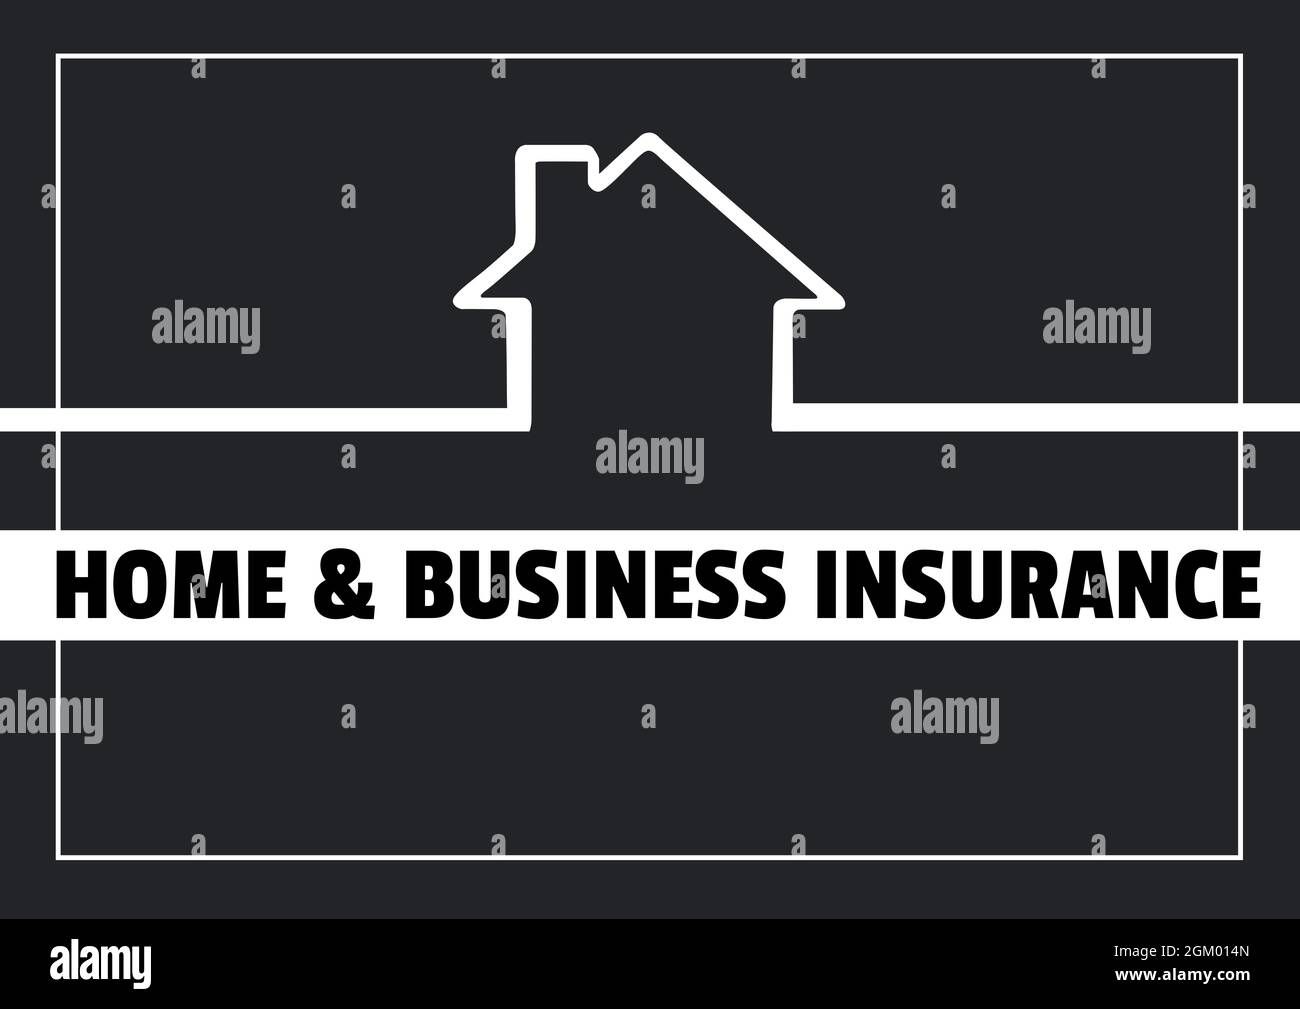 Home and business insurance text banner with house icon against black background Stock Photo